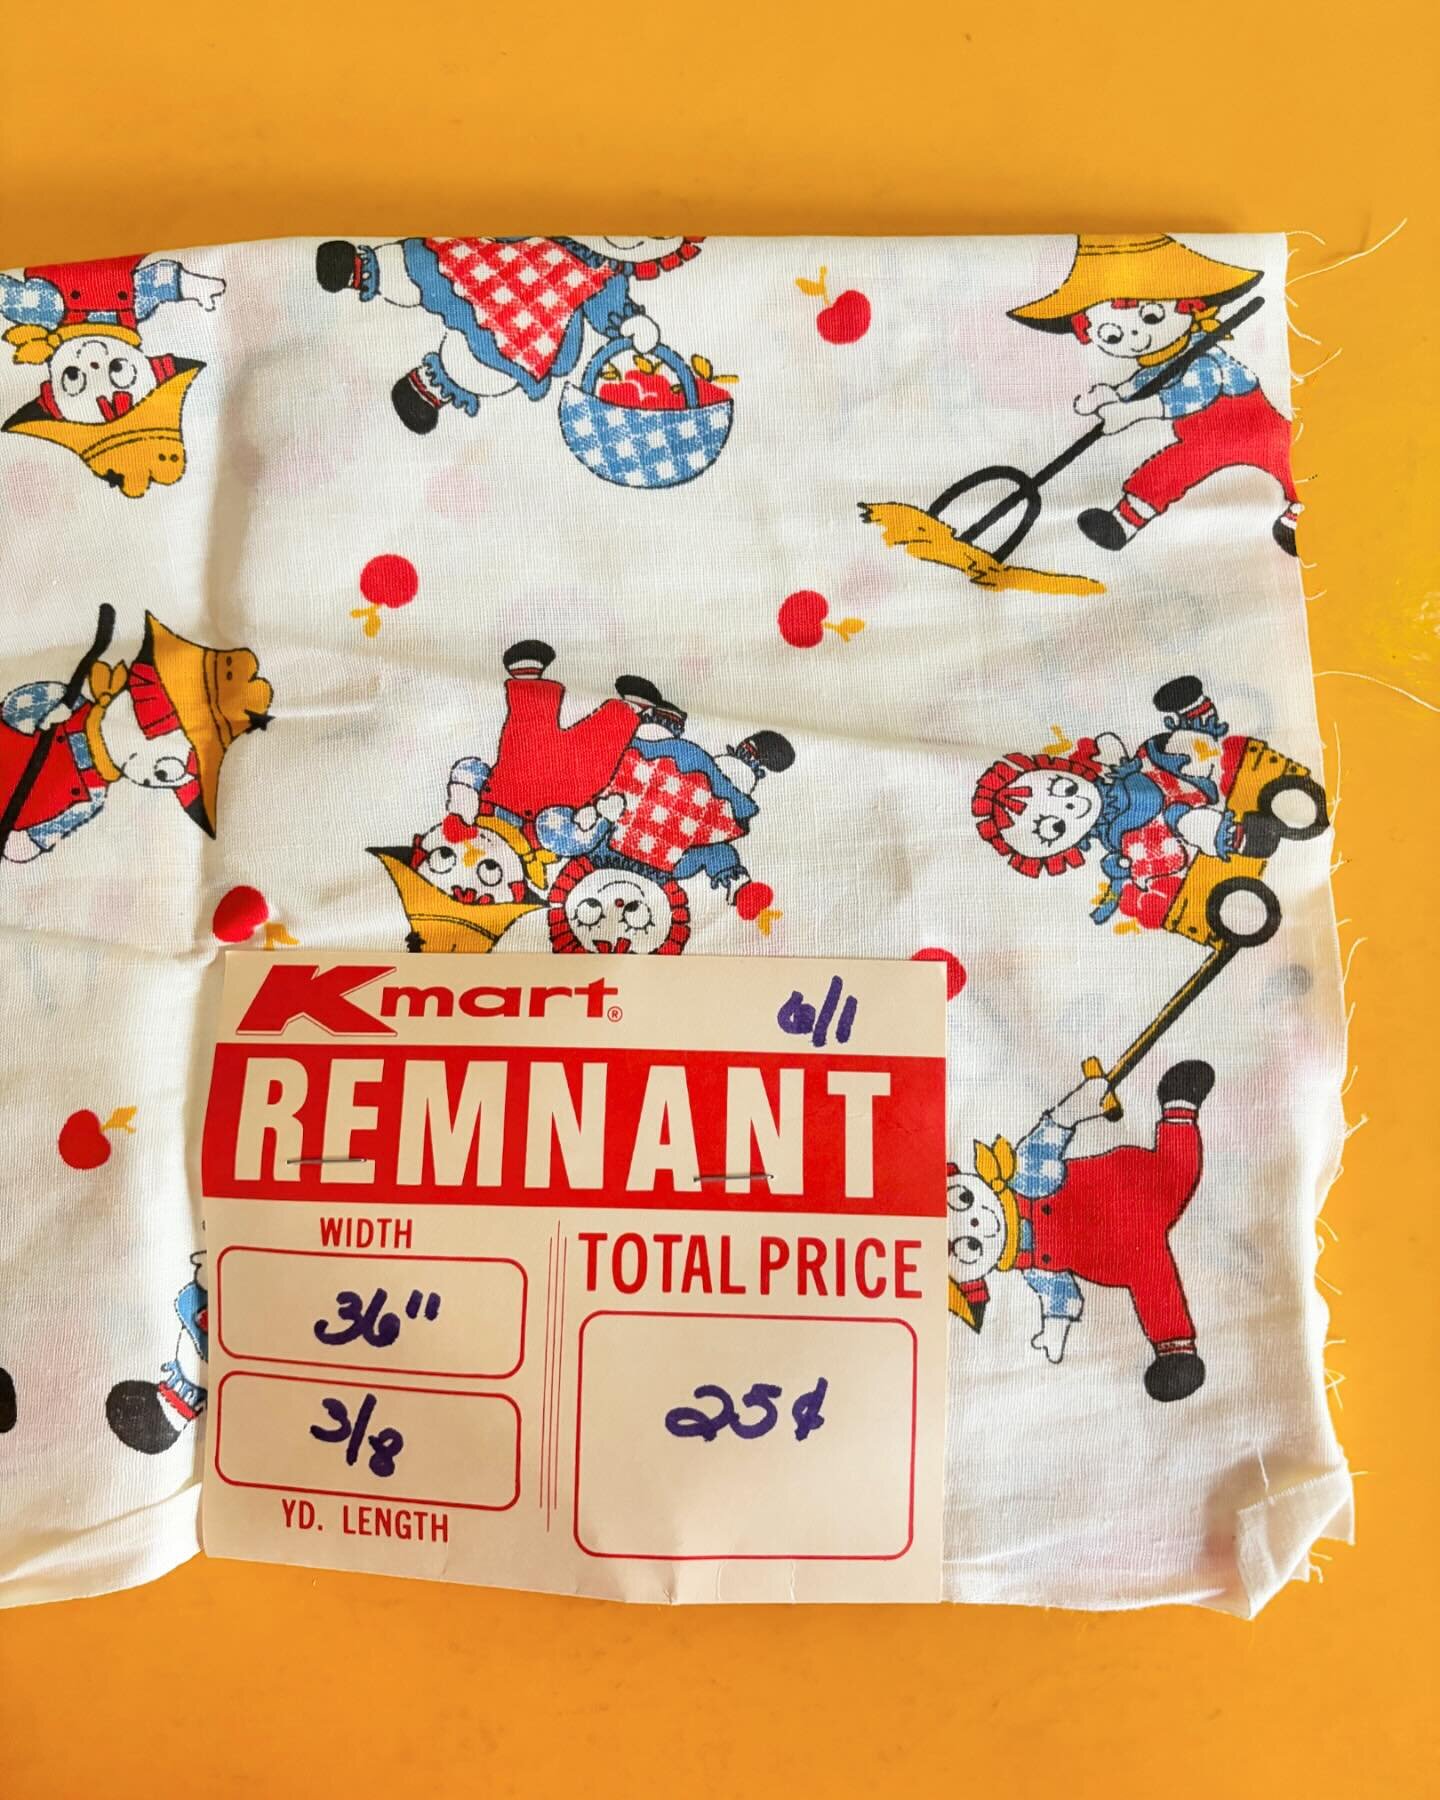 I&rsquo;m not sure how long it had been in a box. Raggedy Ann was definitely my favorite when I was very young. However, I have no recollection that Kmart had a fabric department. #estatesalefinds

#kmart #raggedyann #mostalgia #mychildhood #vintagef